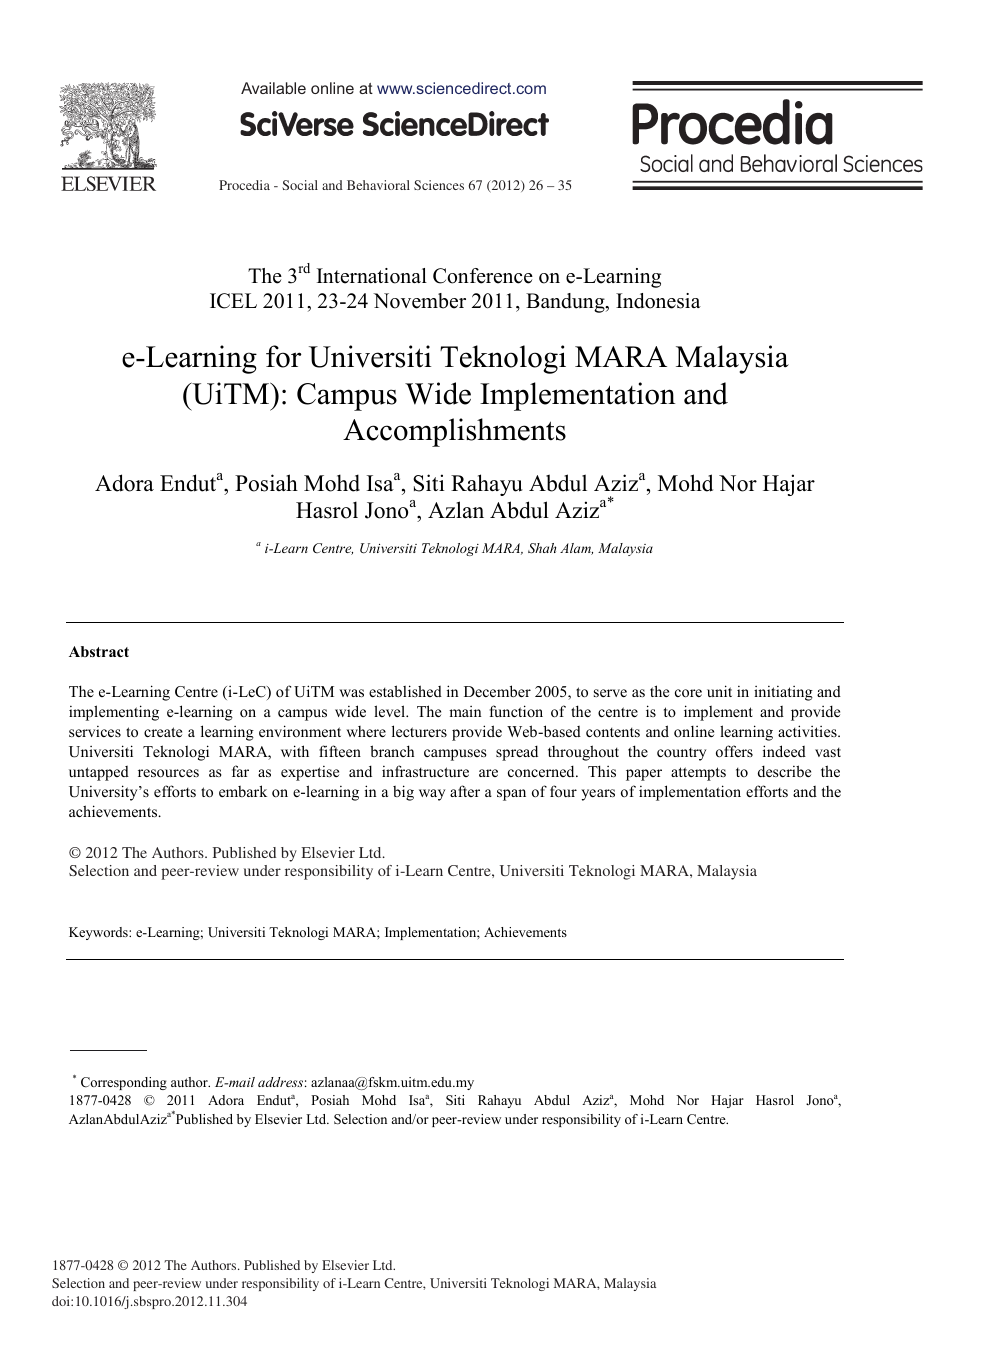 E Learning For Universiti Teknologi Mara Malaysia Uitm Campus Wide Implementation And Accomplishments Topic Of Research Paper In Economics And Business Download Scholarly Article Pdf And Read For Free On Cyberleninka Open